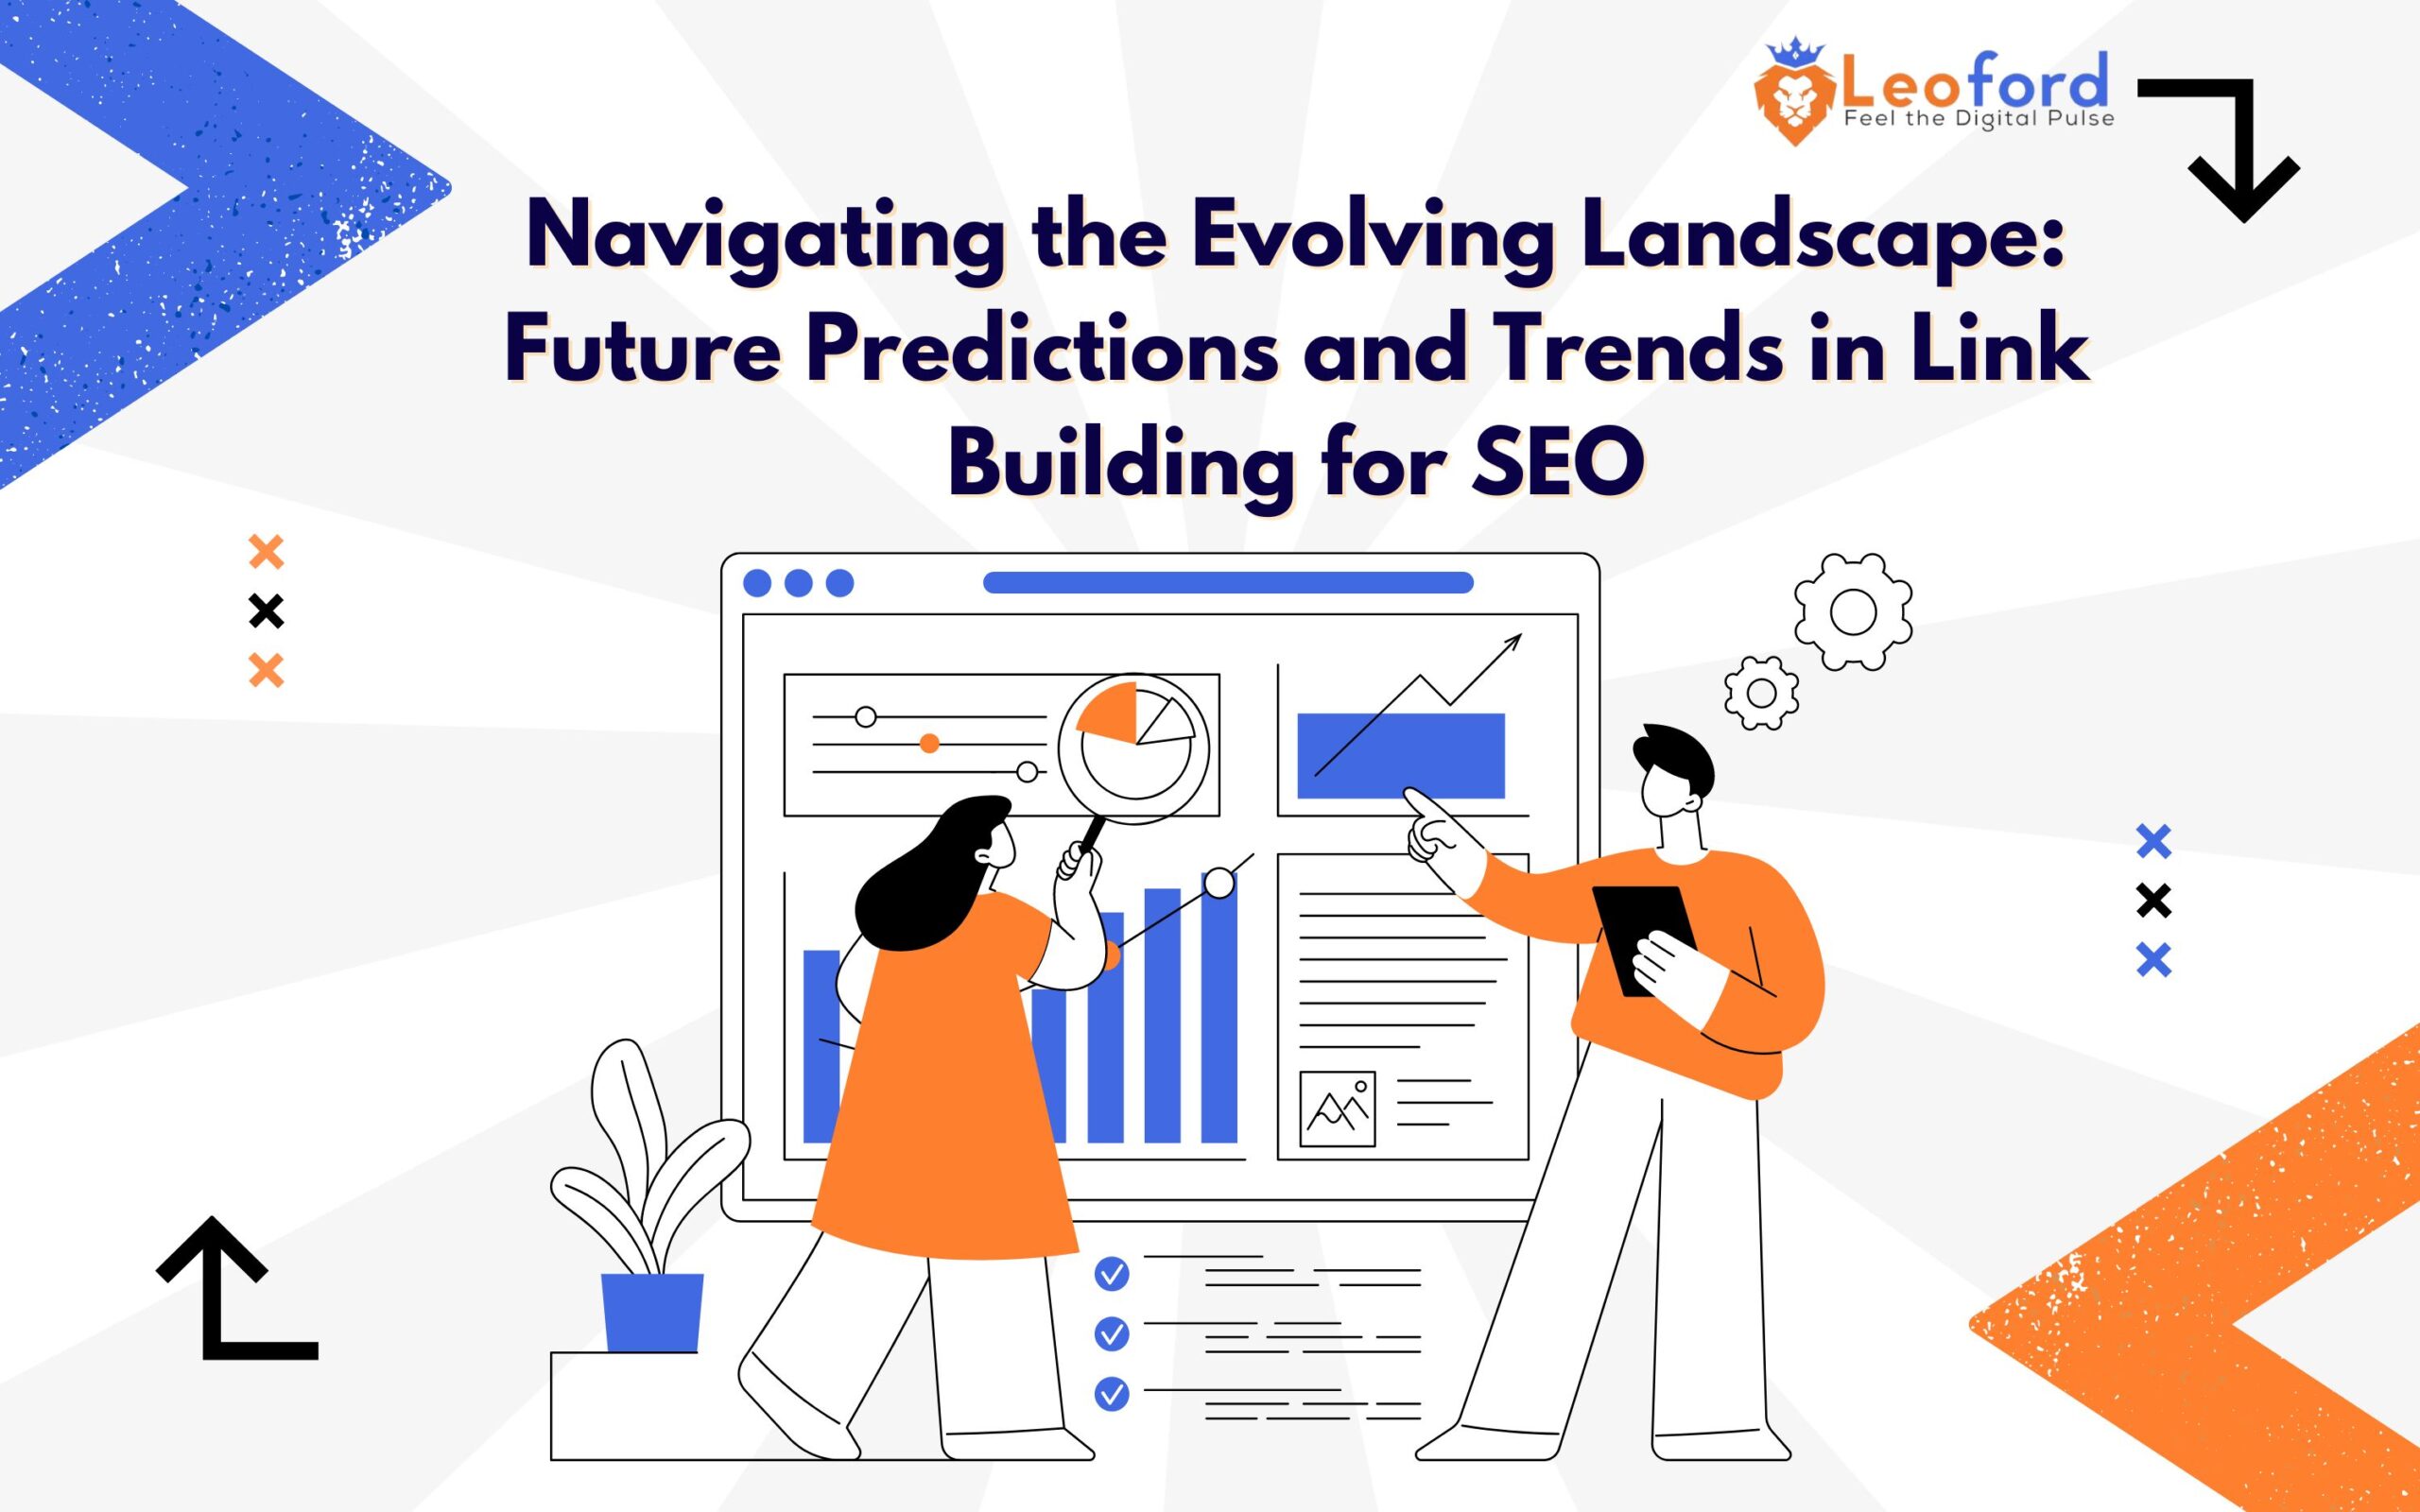 Future Predictions and Trends in Link Building for SEO